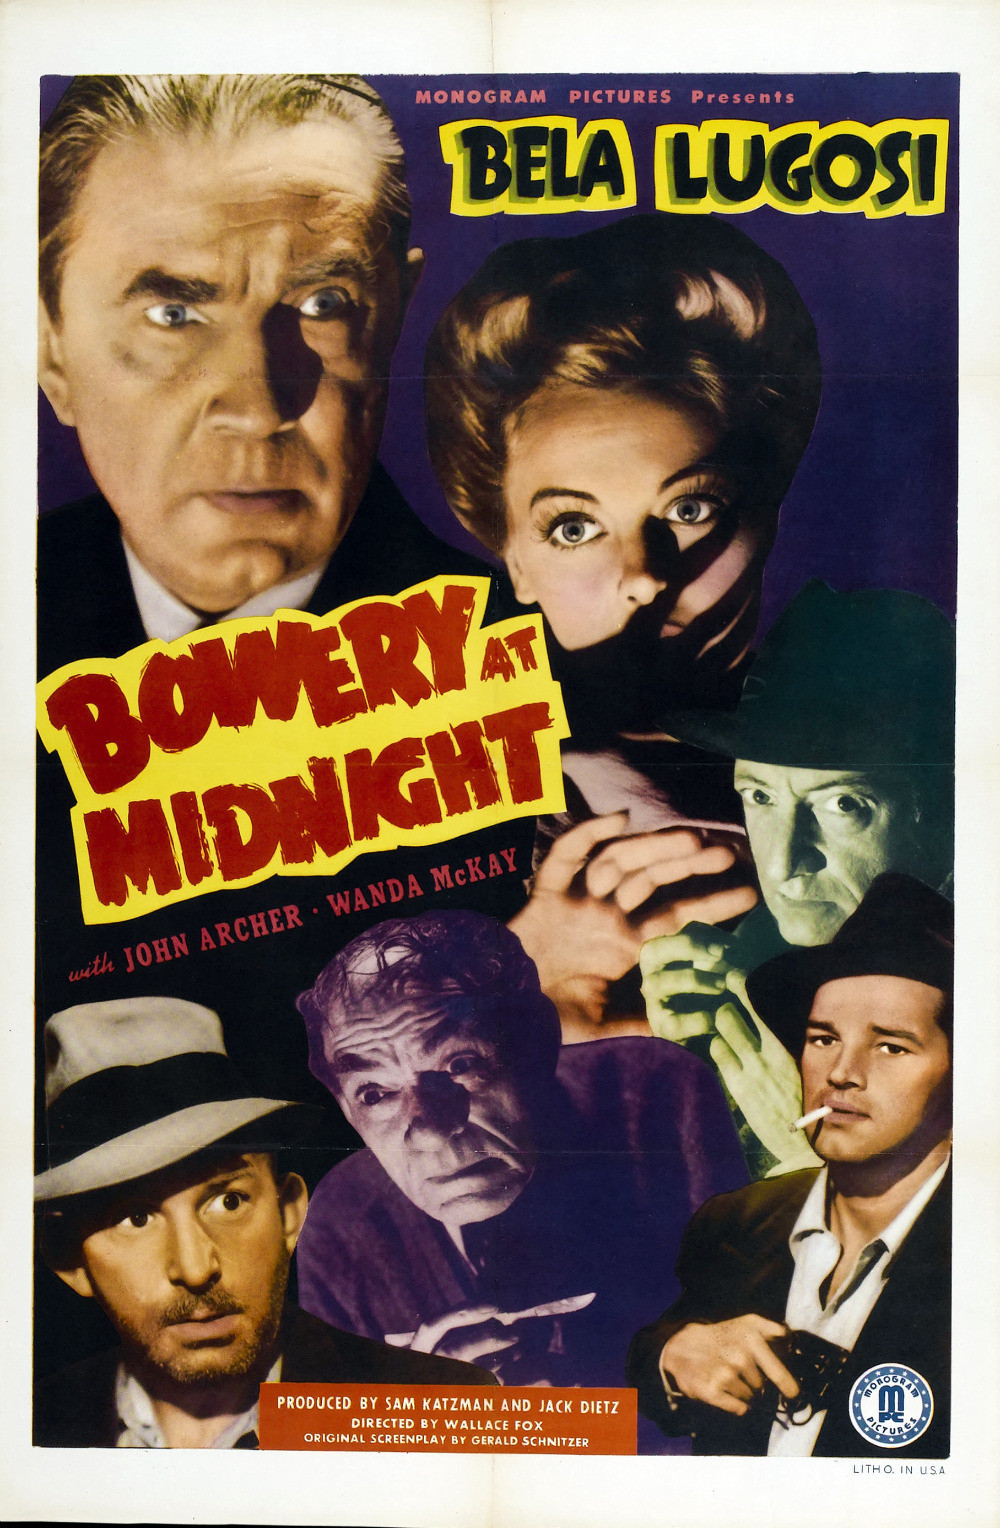 Poster for the movie "Bowery at Midnight"